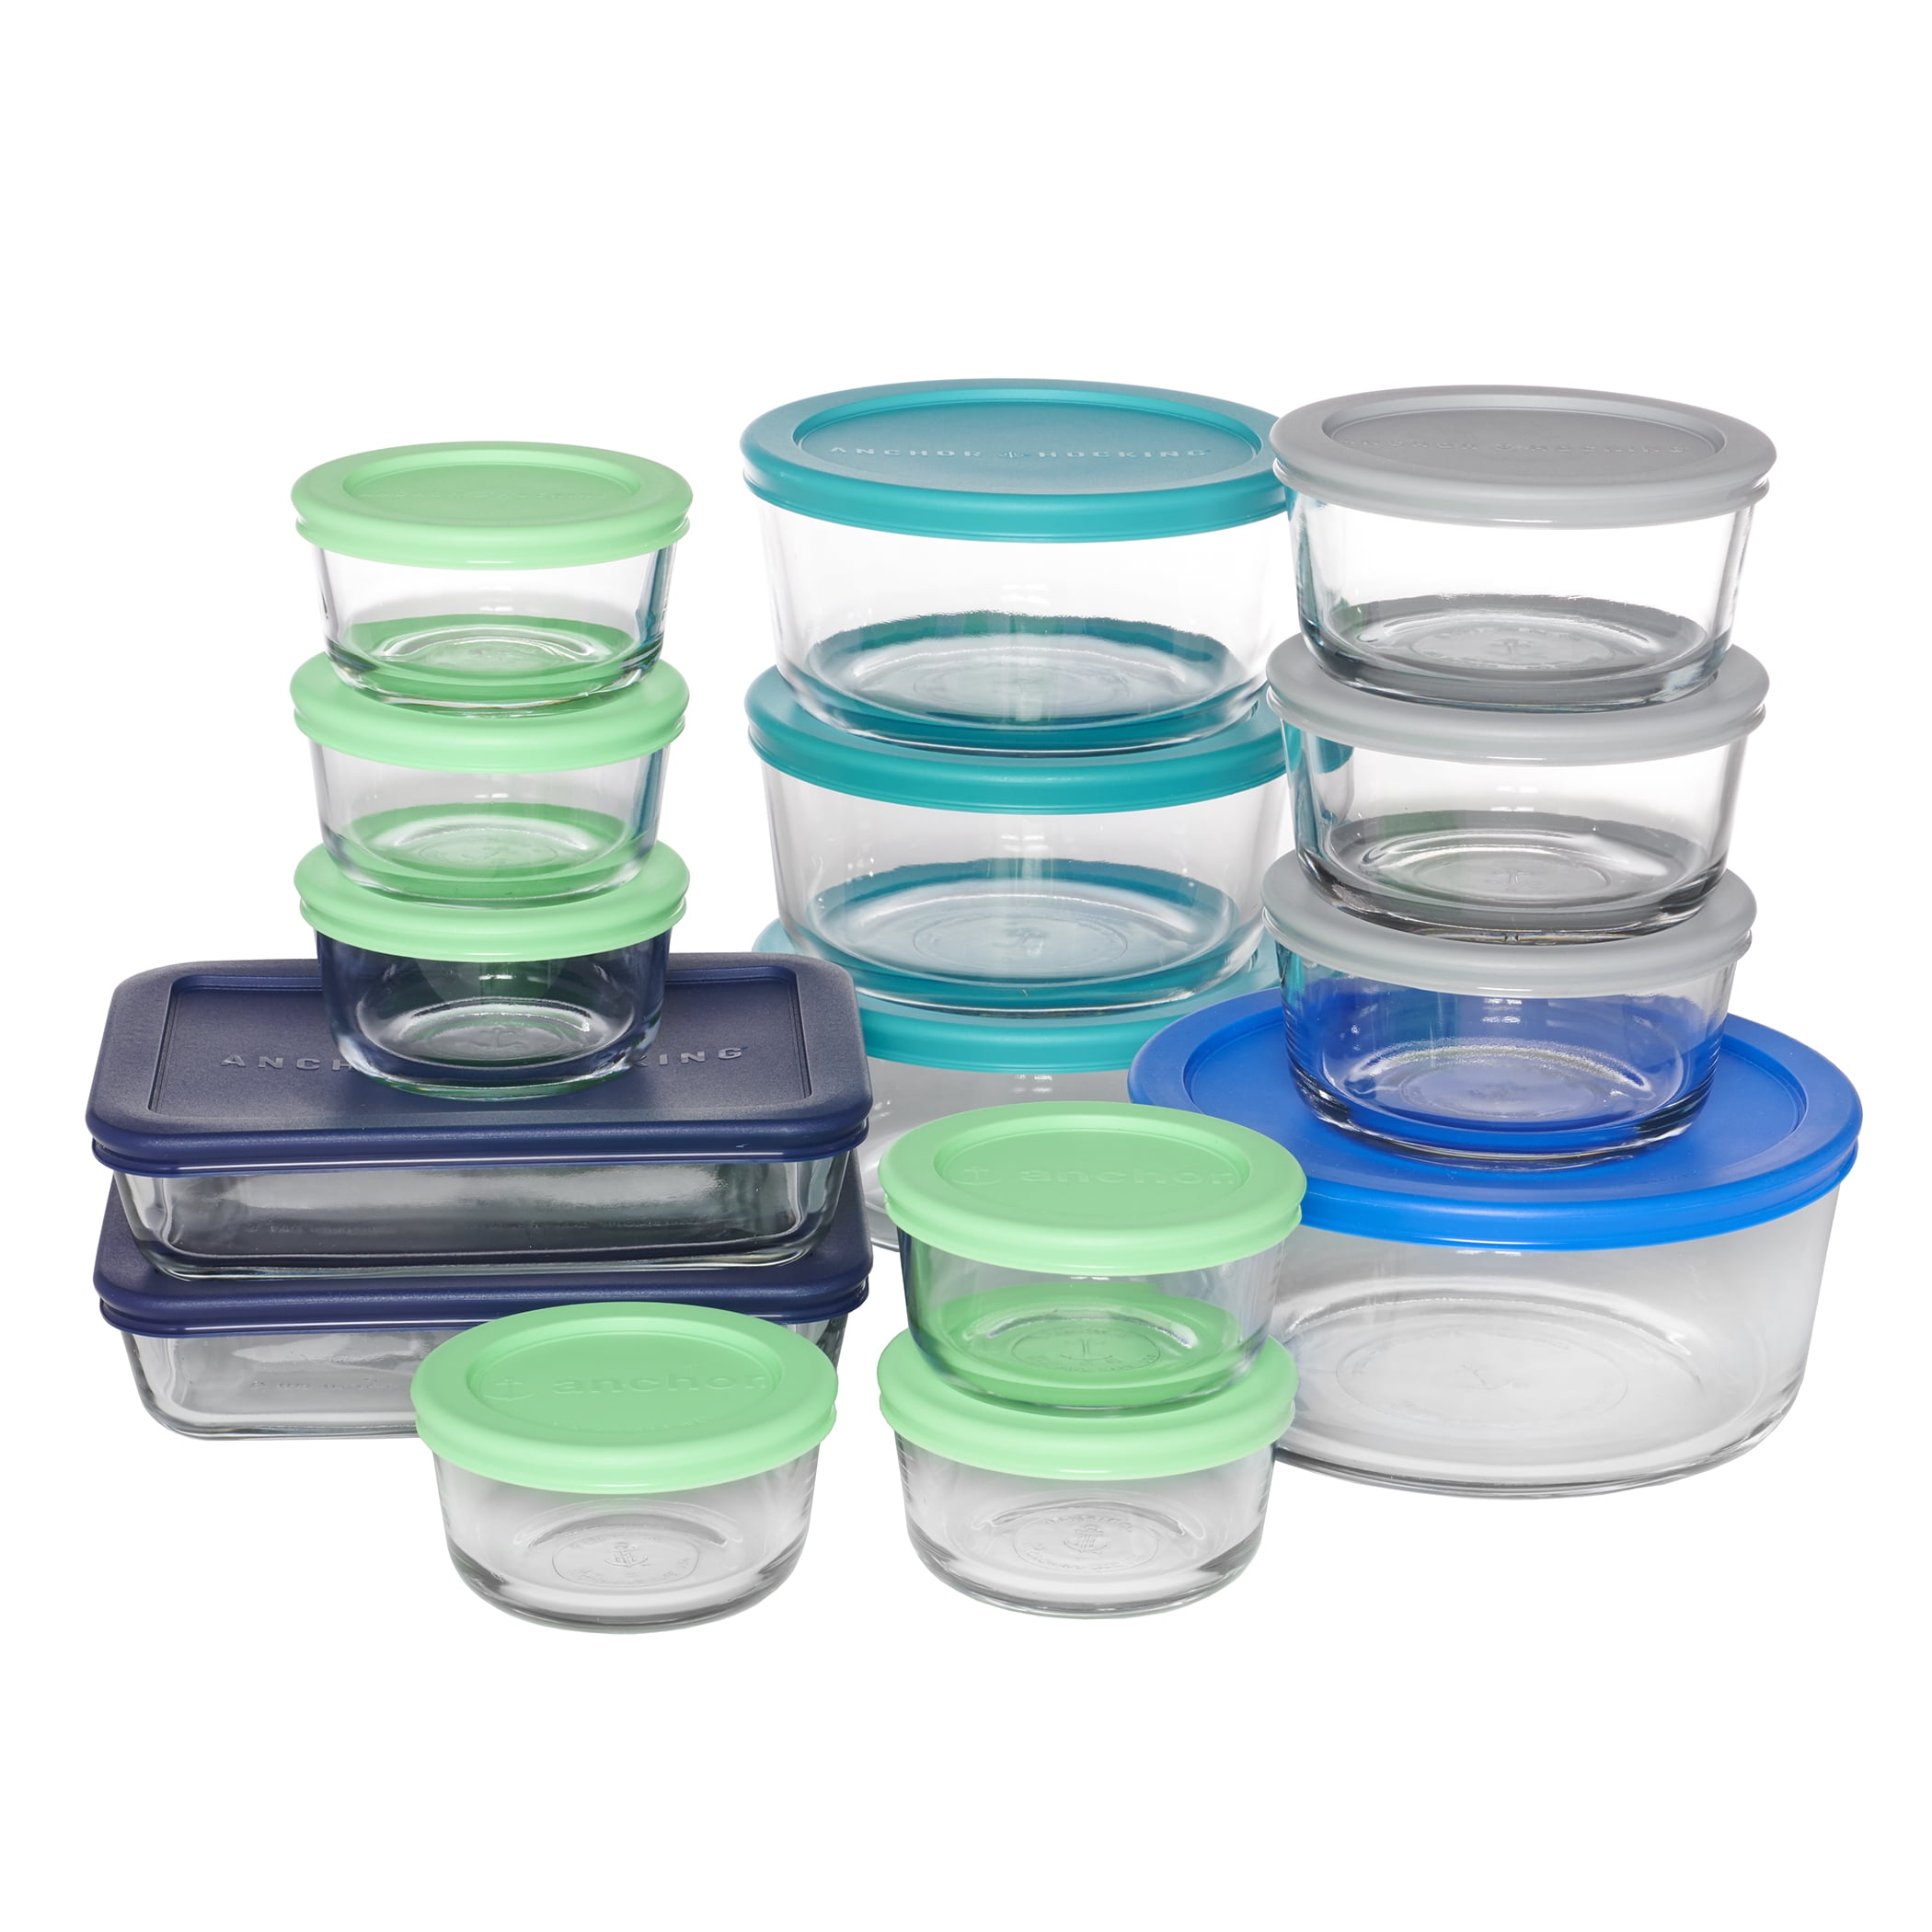 Anchor Hocking 30 Piece Glass Food Storage and Bake Container Sets including Variety Sizes and Shapes